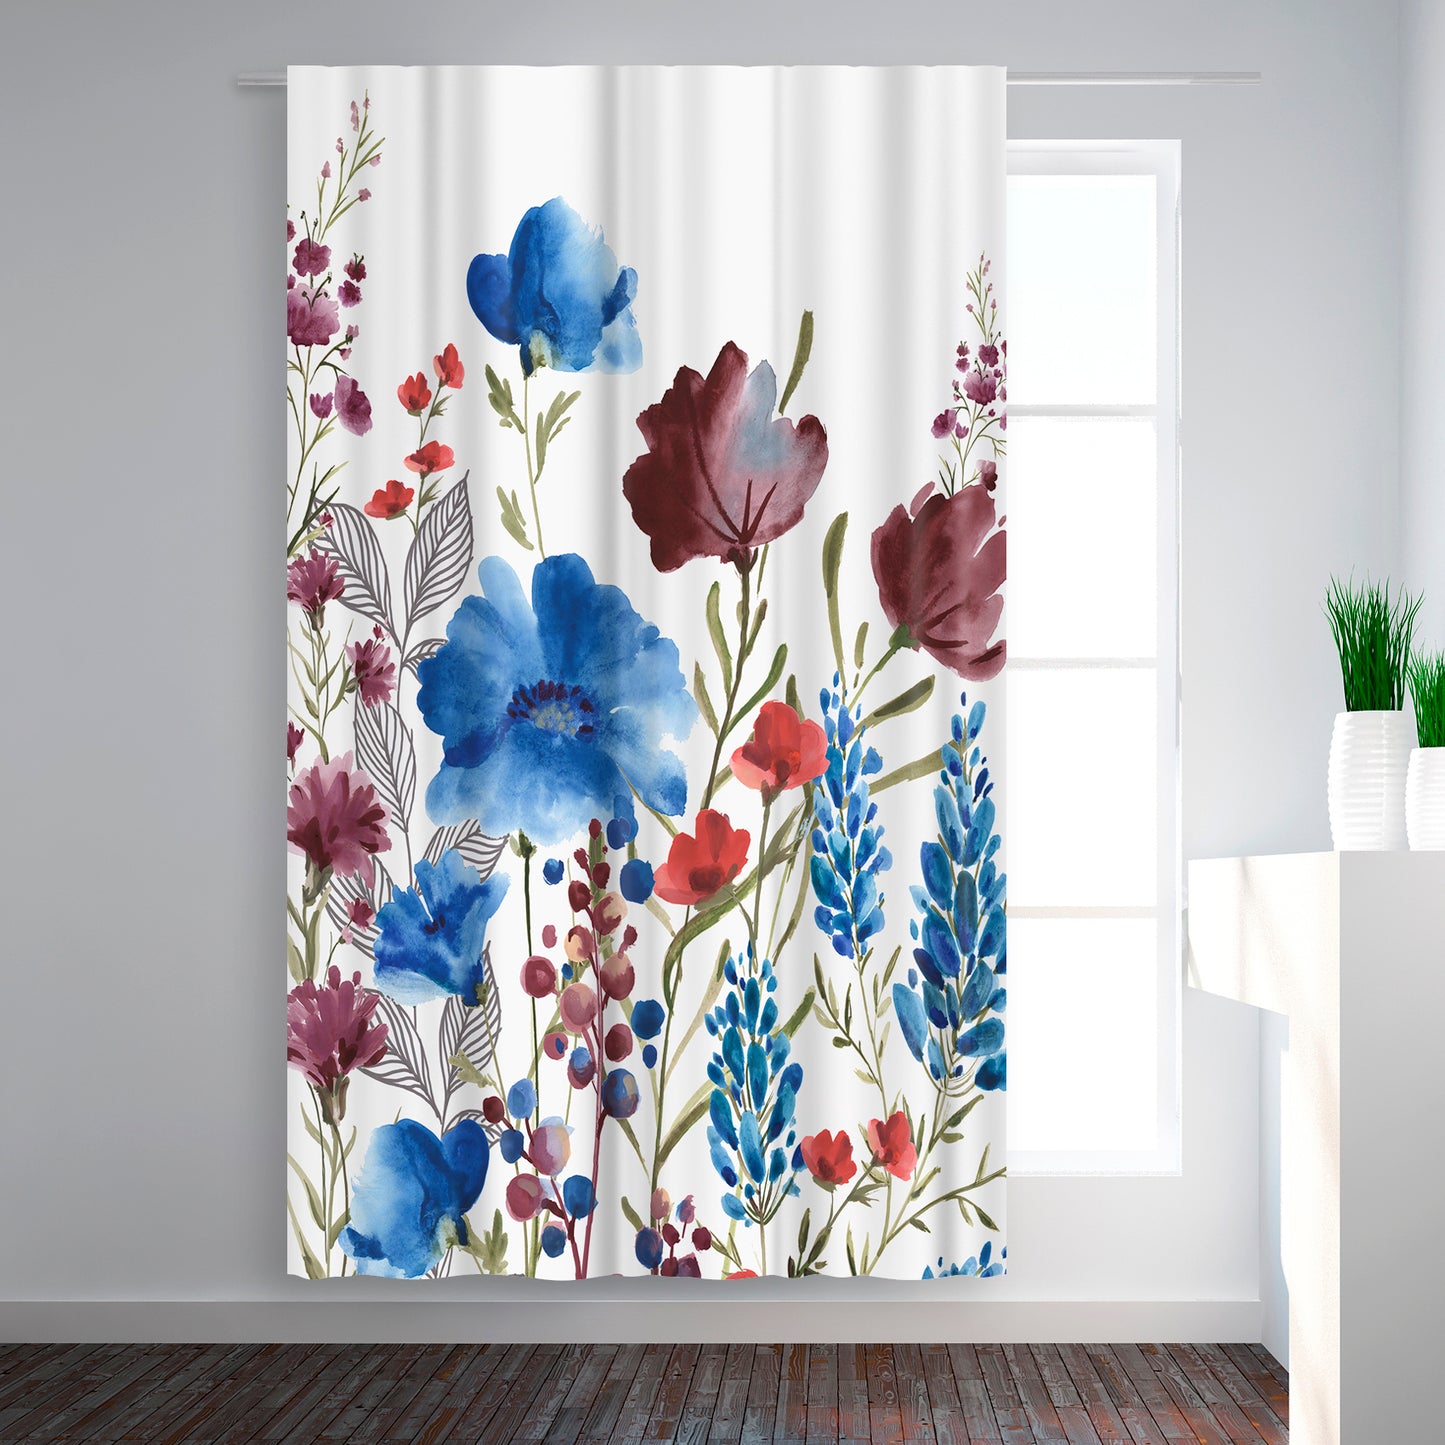 Blackout Curtain Single Panel - Willowherb I by PI Creative Art - Blackout Curtains - Americanflat